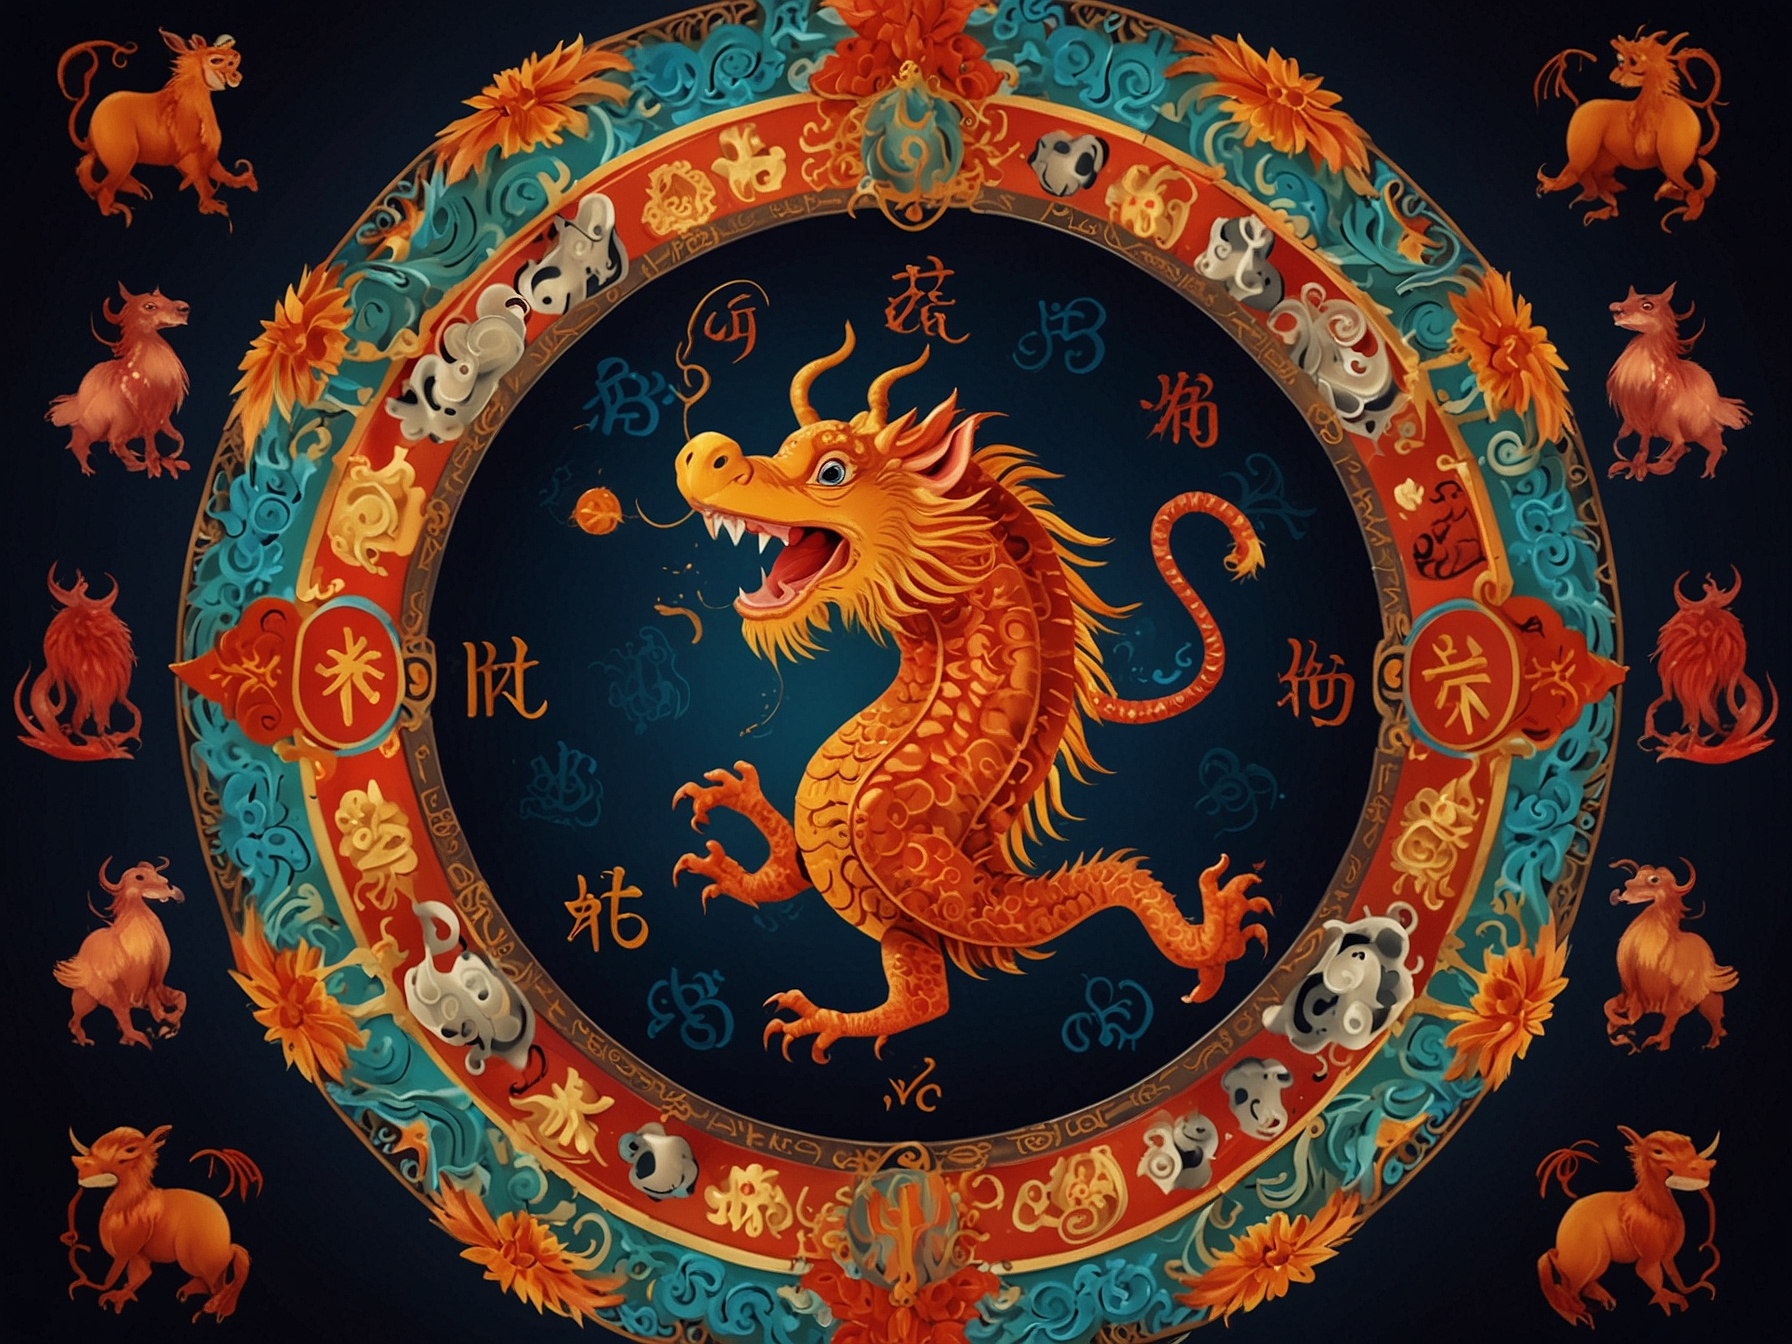 A captivating illustration of the twelve Chinese zodiac signs arranged in a circle with the Dragon, Rat, Horse, Goat, and Monkey highlighted in vibrant colors, symbolizing their luck this week.